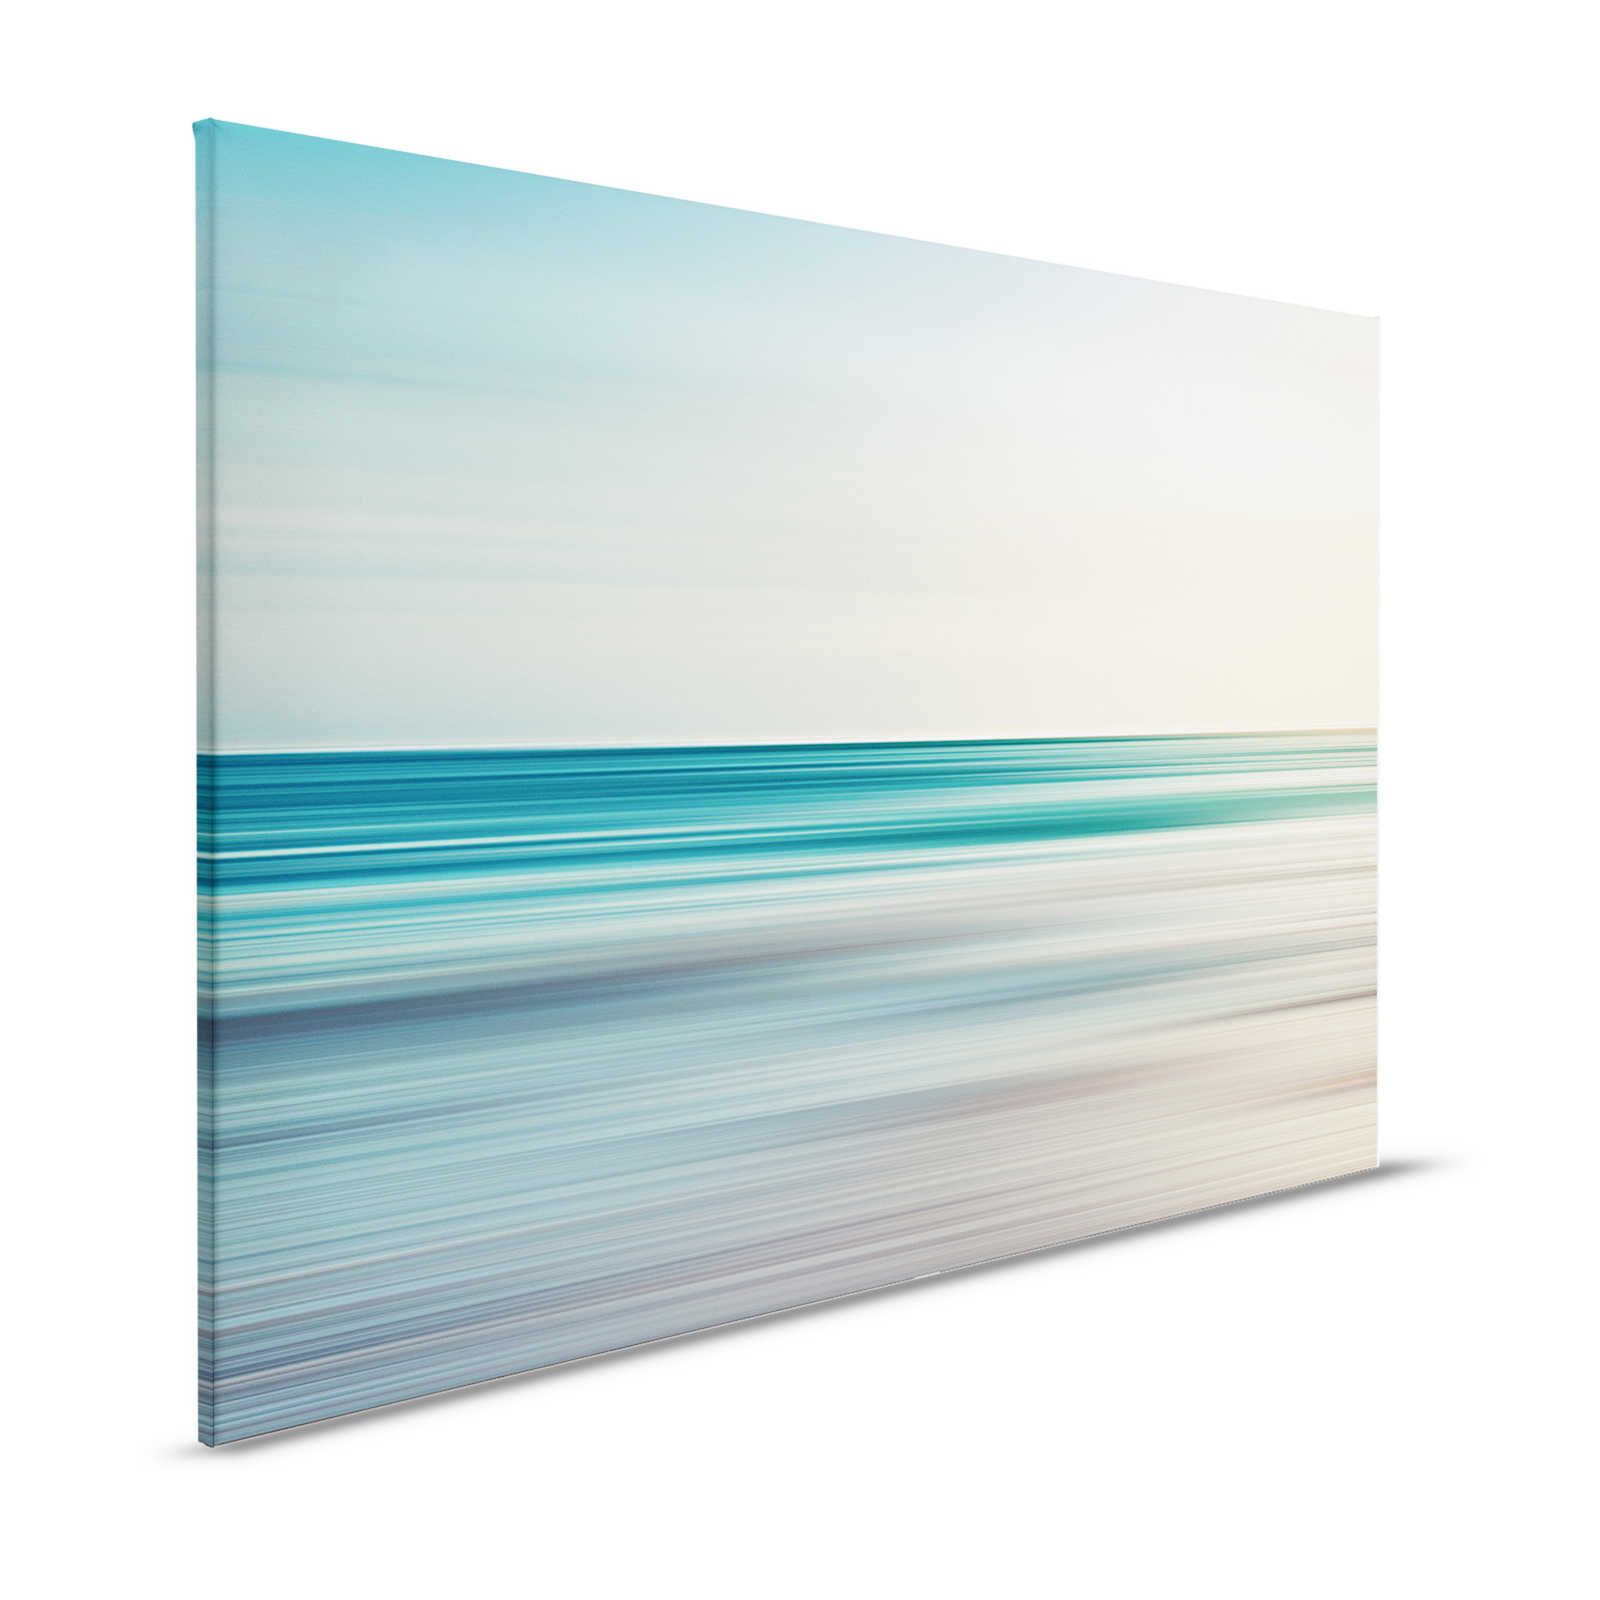 Horizon 1 - Canvas painting abstract landscape in blue - 1,20 m x 0,80 m
